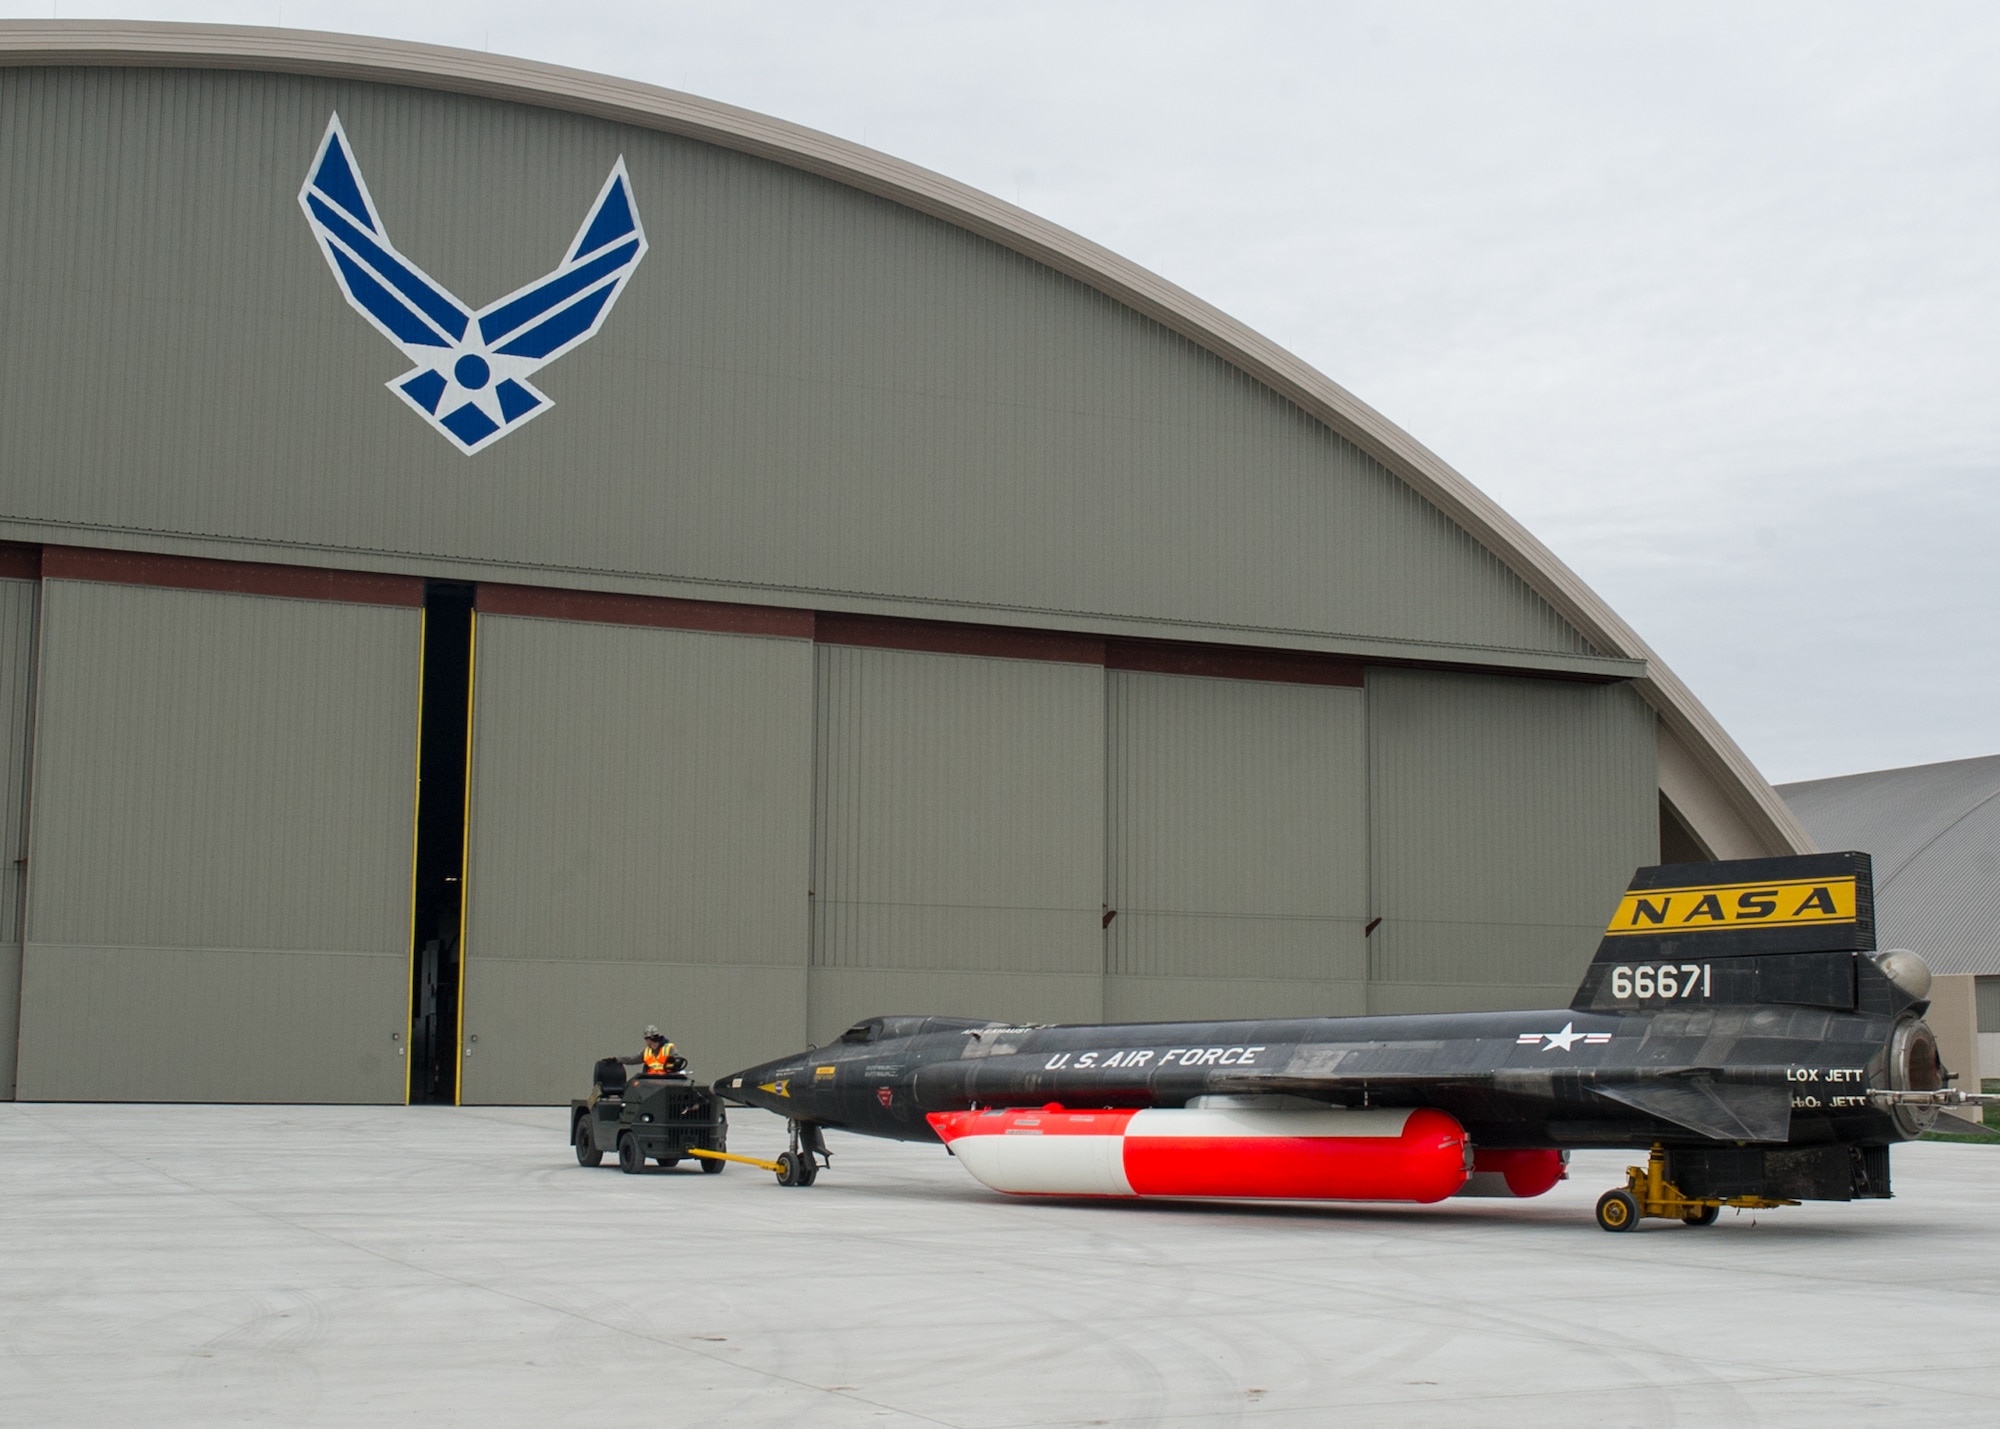 Museum restoration crews move the X-15A-2 from the restoration hangar to the museum’s new fourth building on Oct. 2, 2015. The X-15 became the first aircraft to be moved into the fourth building, where it will be part of the expanded Space Gallery. (U.S. Air Force photo by Ken LaRock)